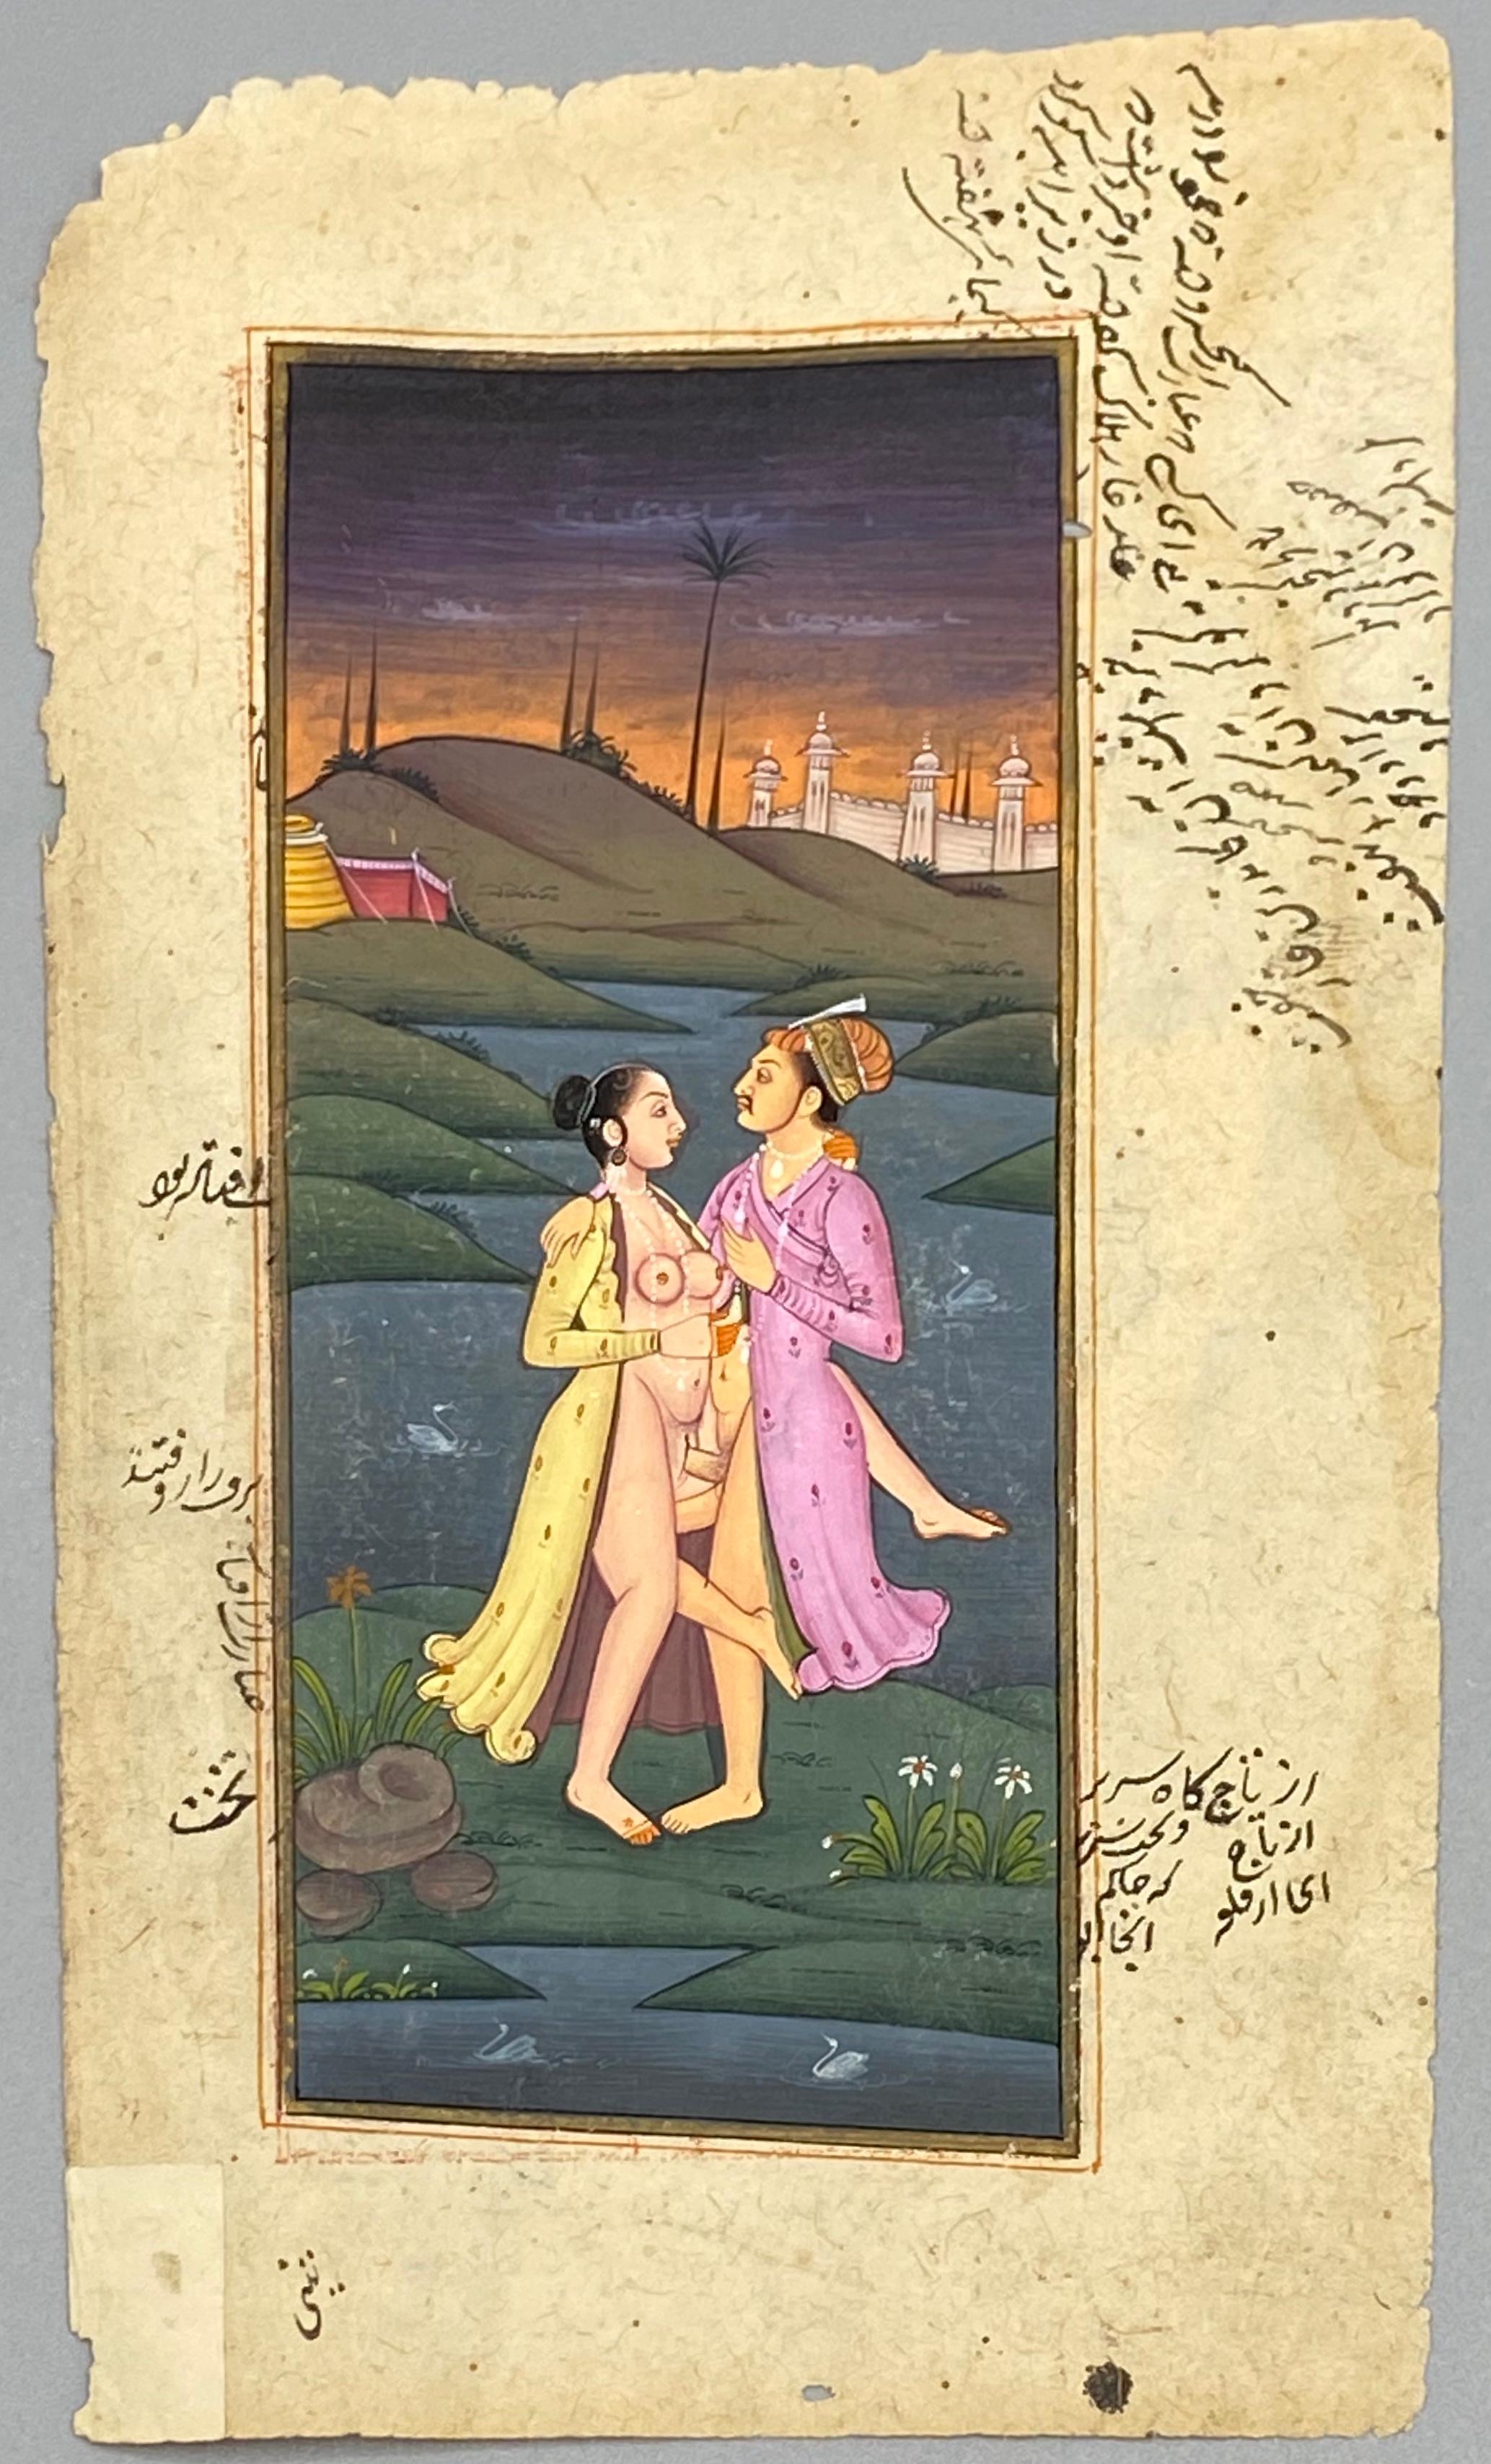 Mughal Prince engaging in Kama Sutra with a Danse - Painting by Unknown